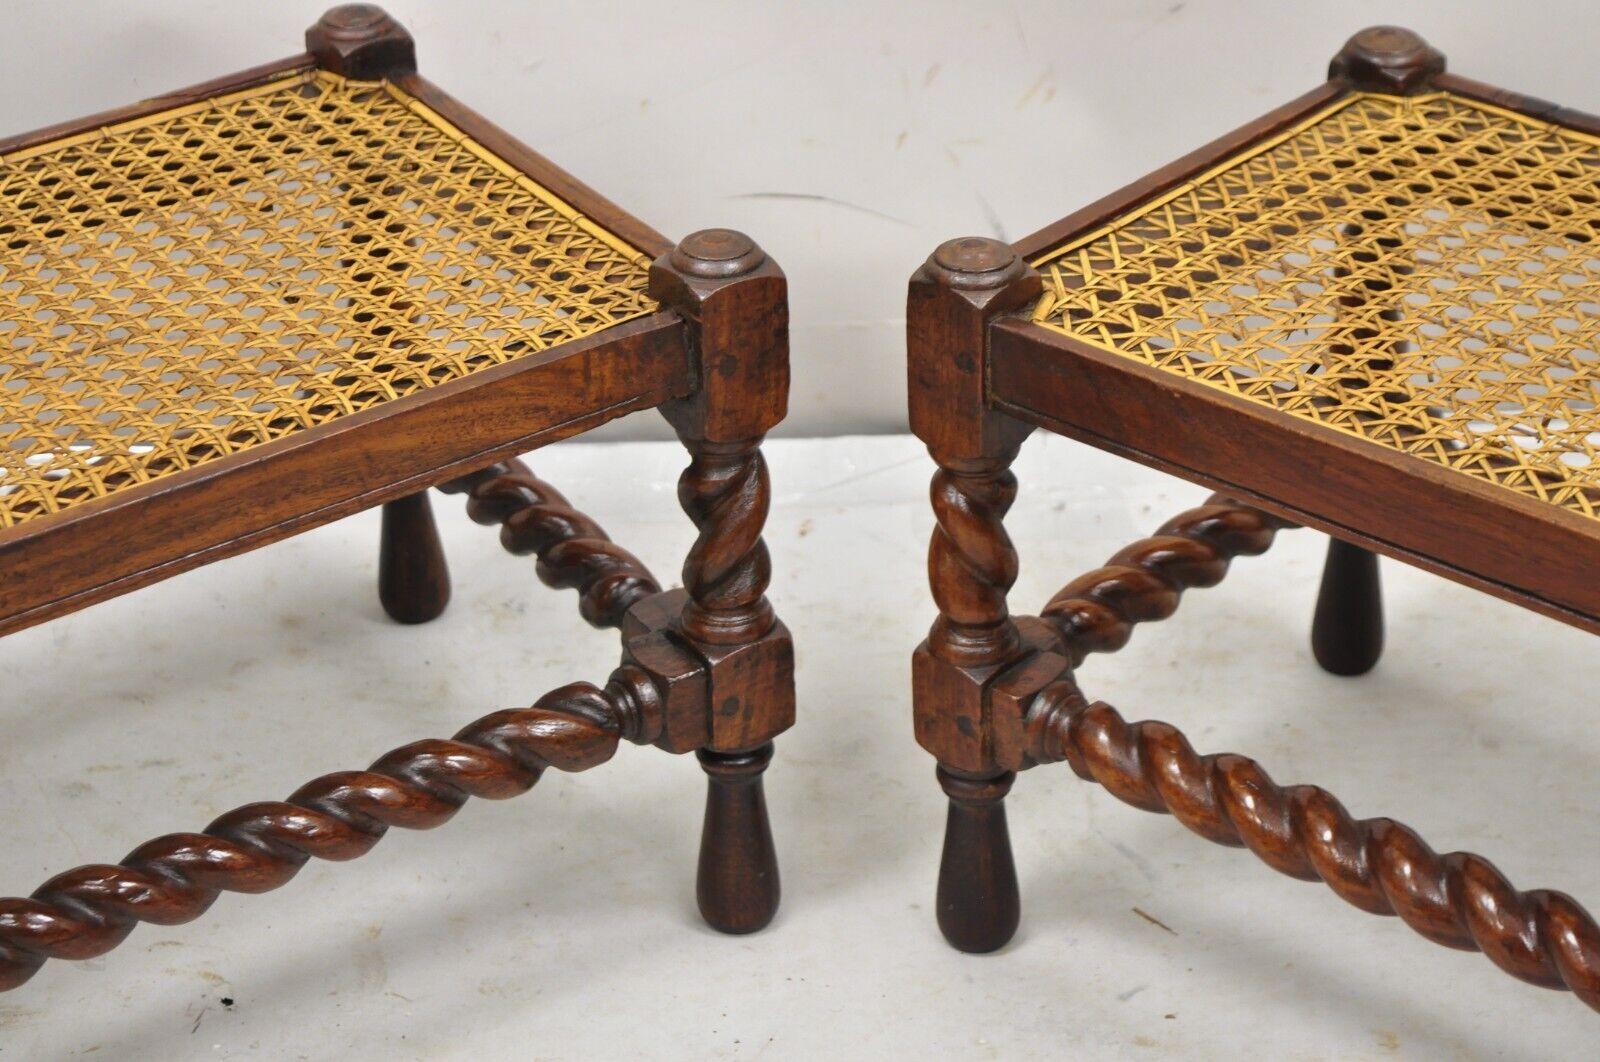 19th Century Antique Jacobean Turn Carved Walnut Handmade Cane Seat Footstool Ottoman - Pair For Sale